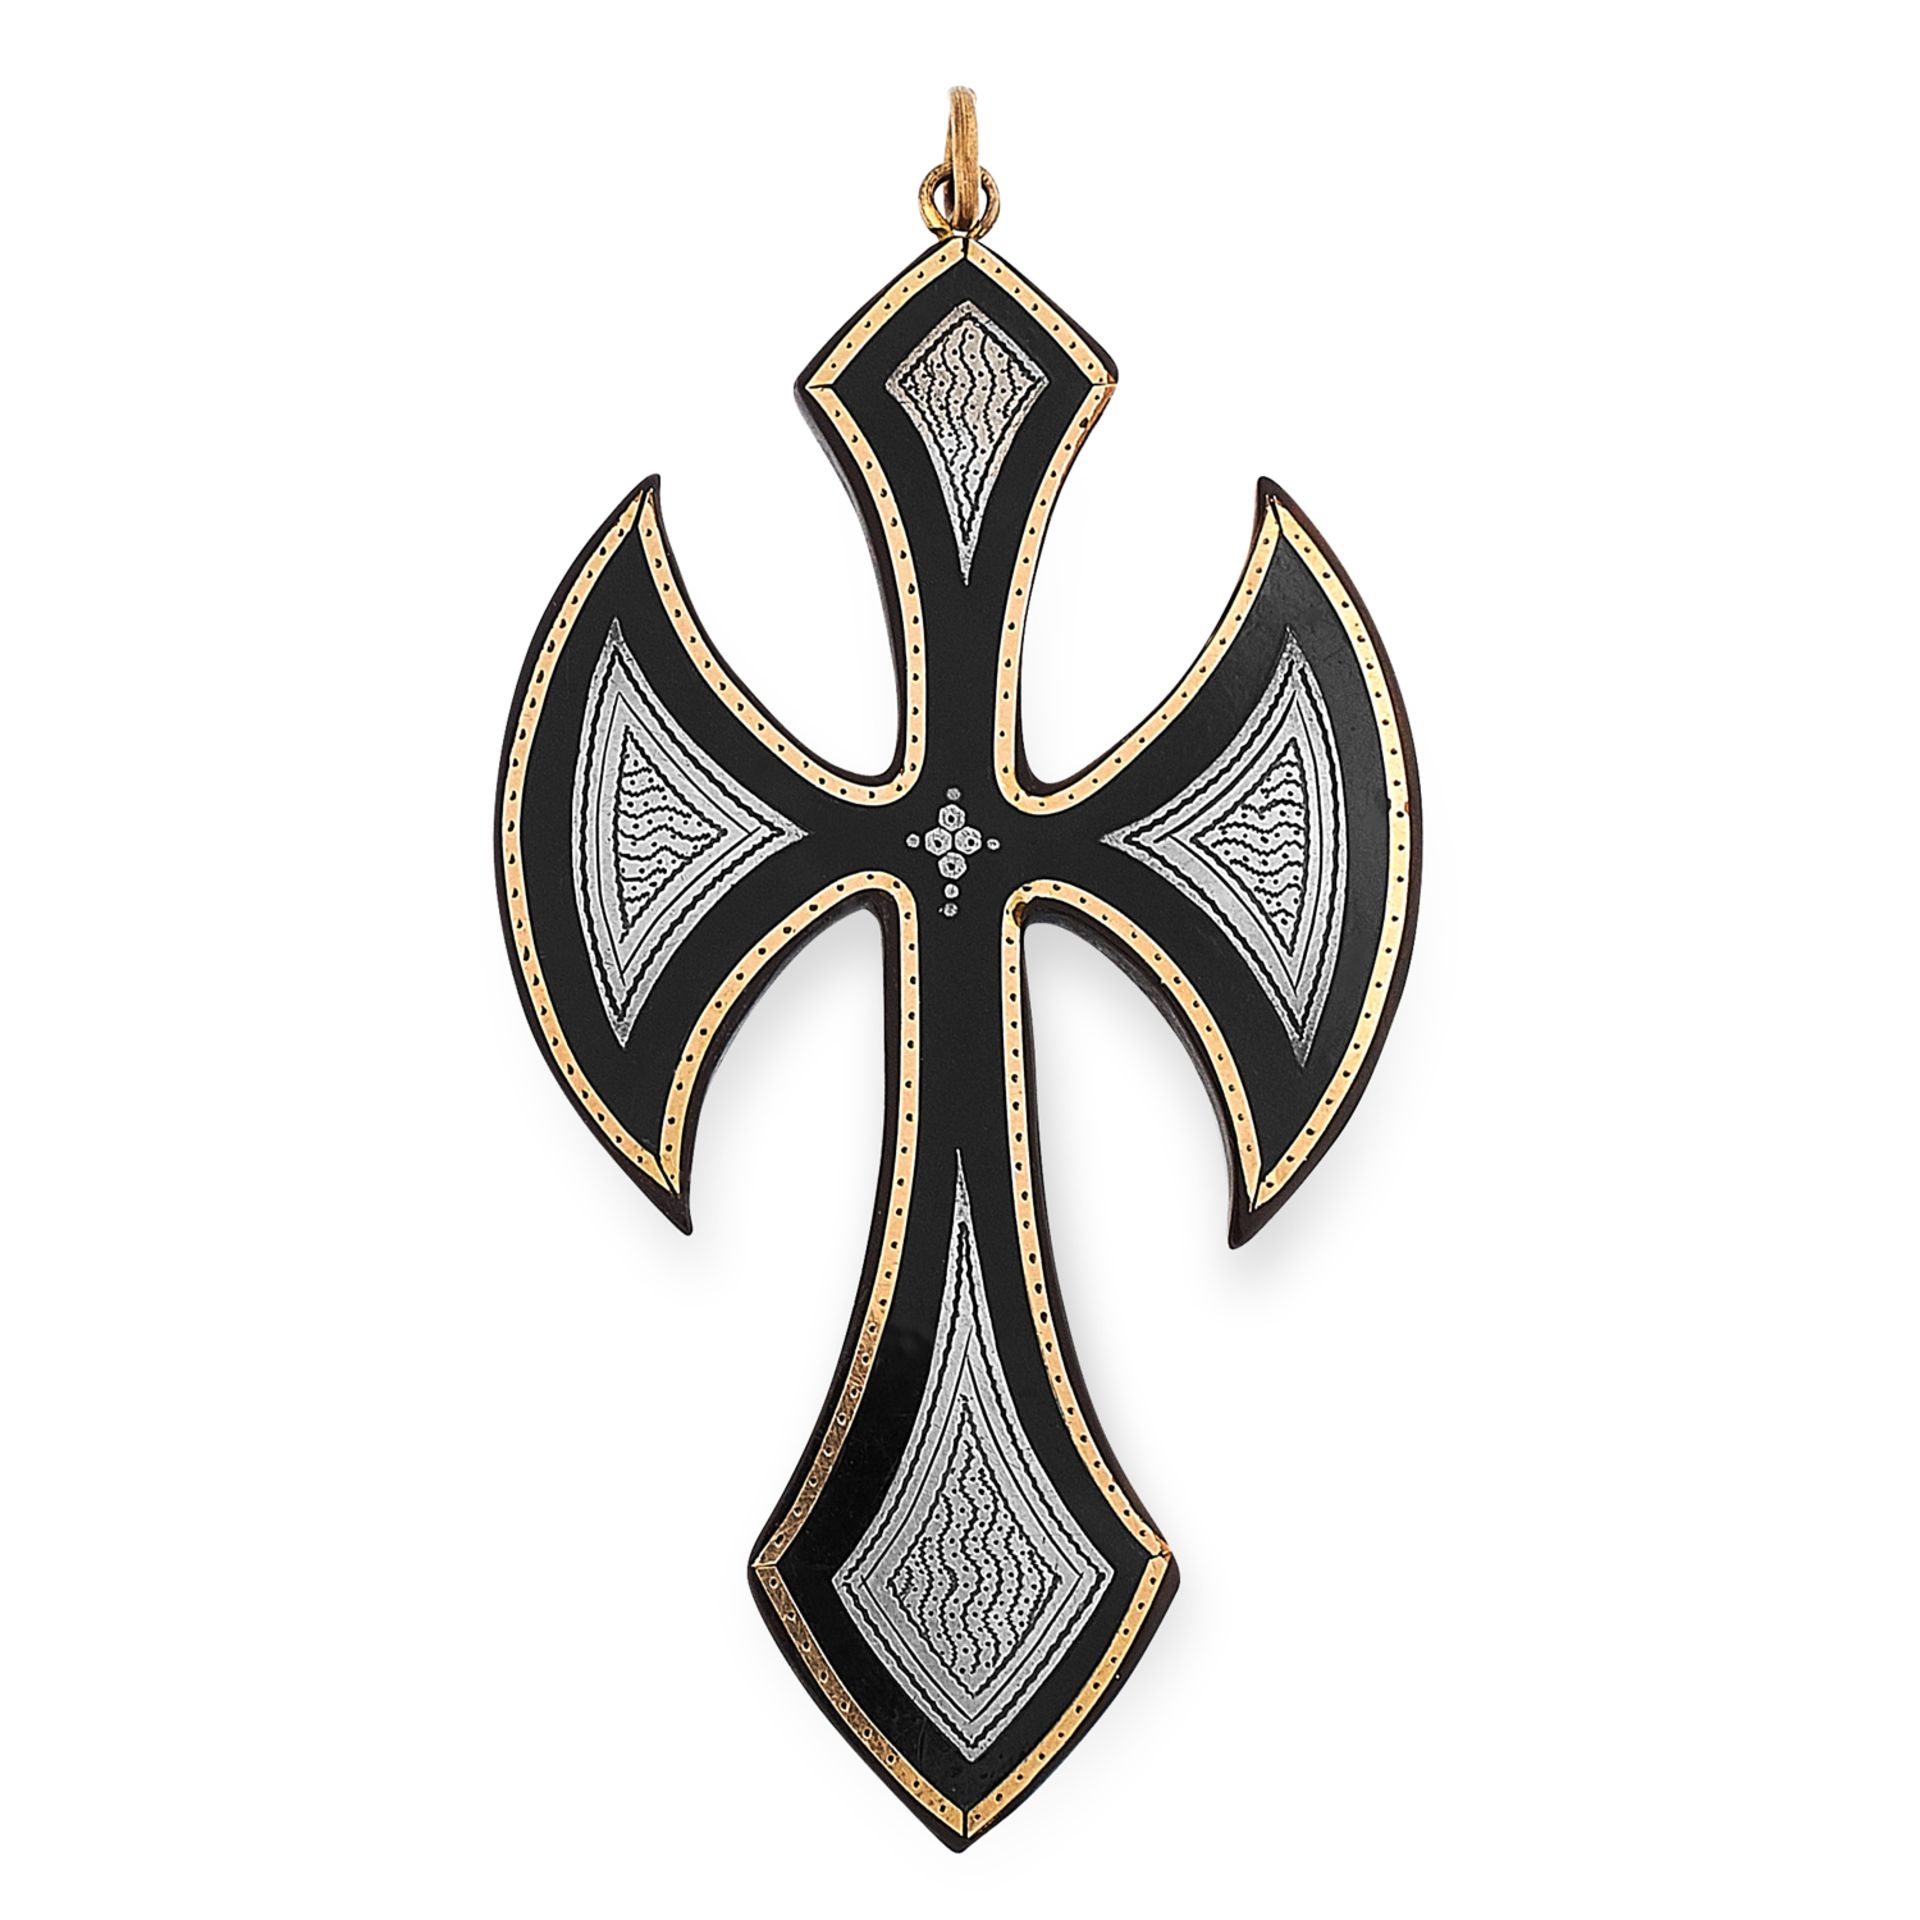 AN ANTIQUE TORTOISESHELL PIQUE CROSS PENDANT, 19TH CENTURY in yellow gold and silver, designed as